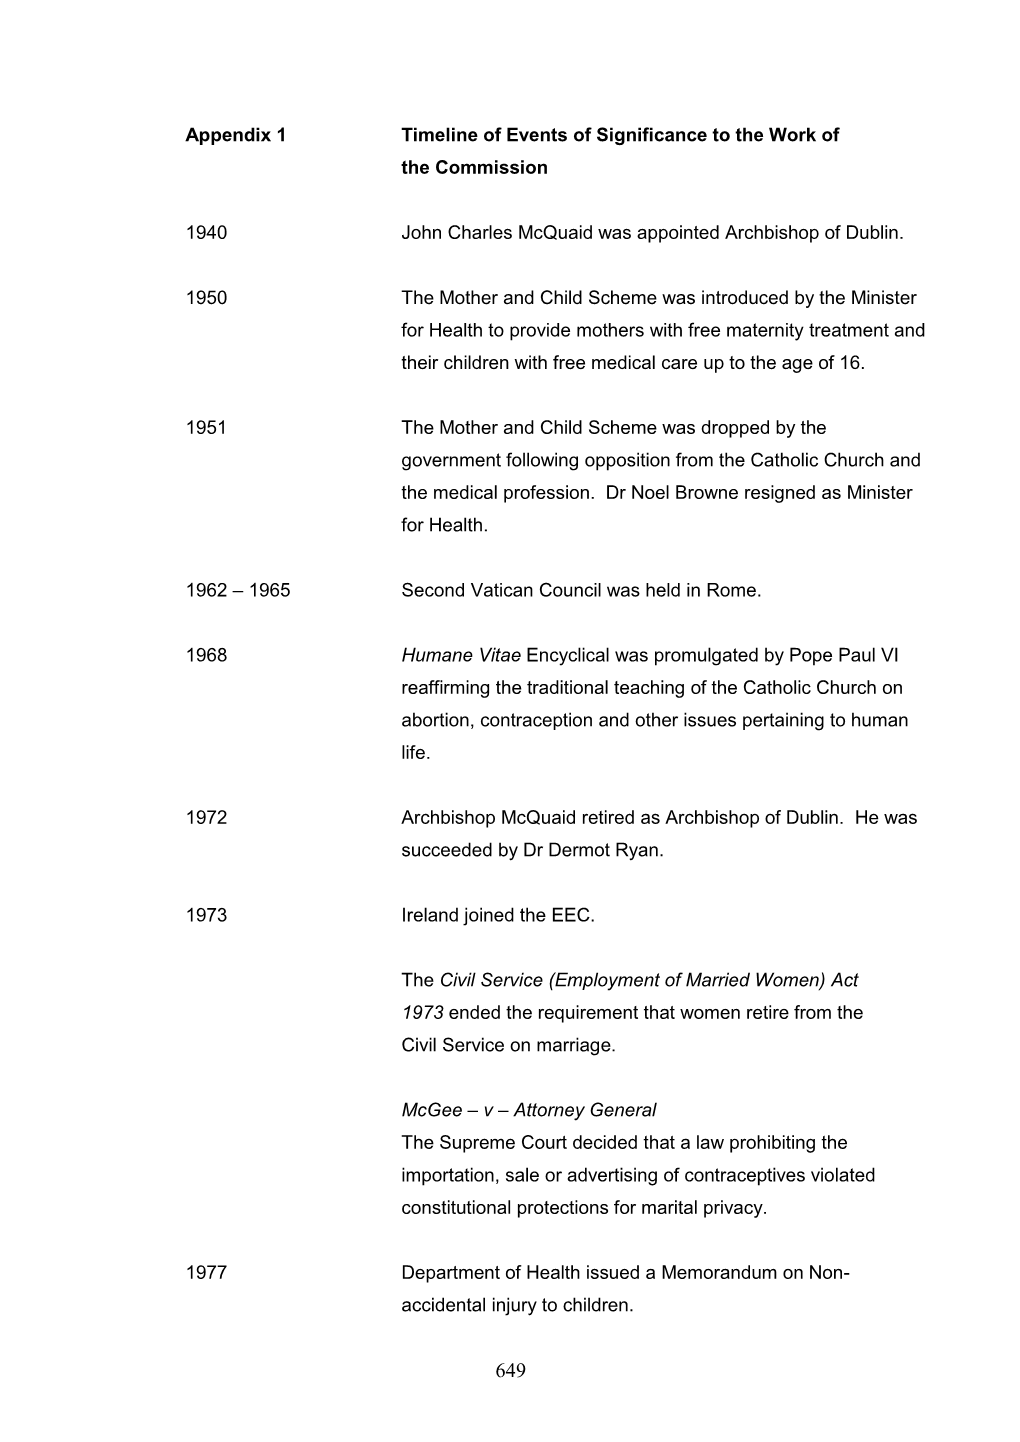 Appendix 1 Timeline of Events of Significance to the Work of the Commission